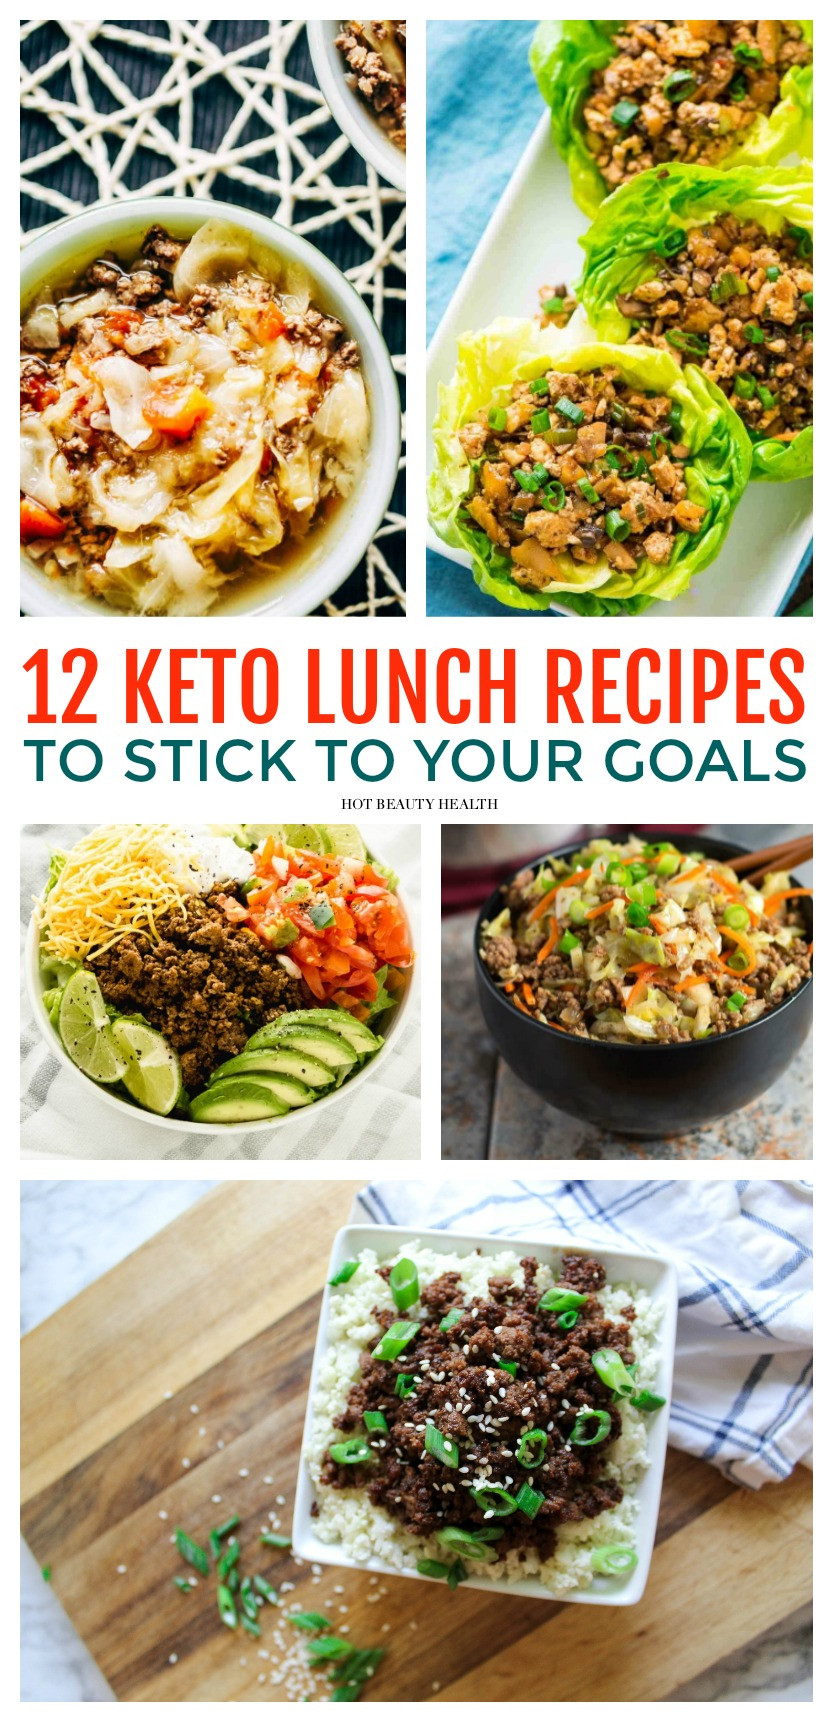 Healthy Keto Lunches For Work
 12 Keto Lunch Recipes That You Can Pack For Work Hot